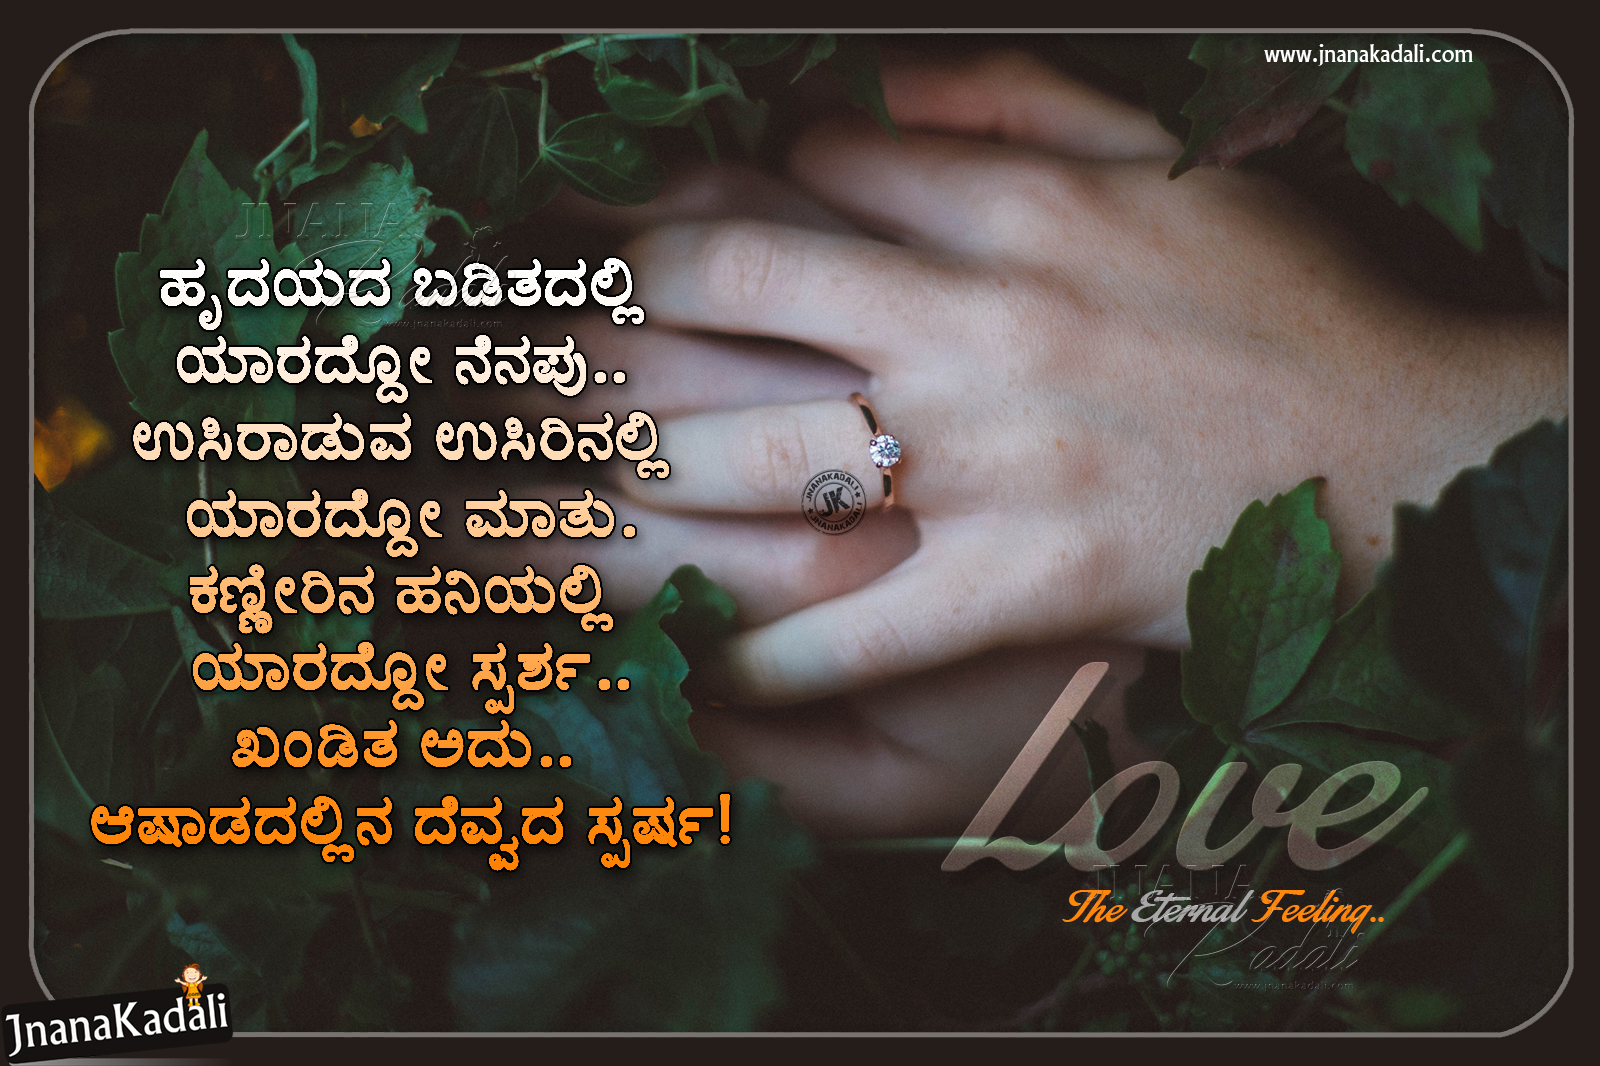 Abraham Lincoln Quotes In Kannada - Daily Quotes